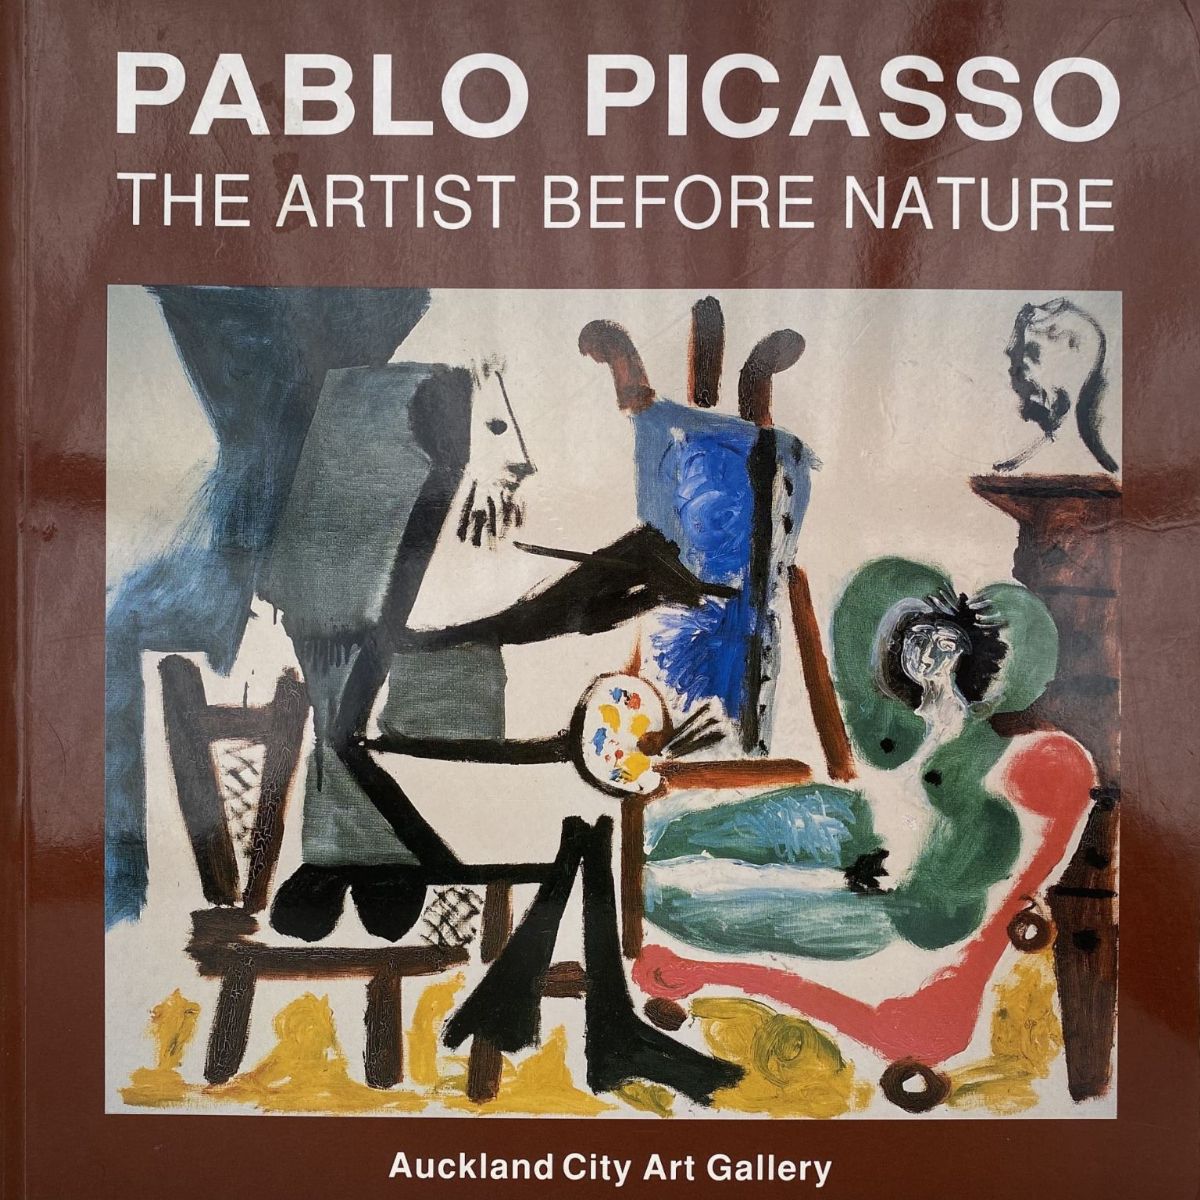 PABLO PICASSO: The Artist Before Nature